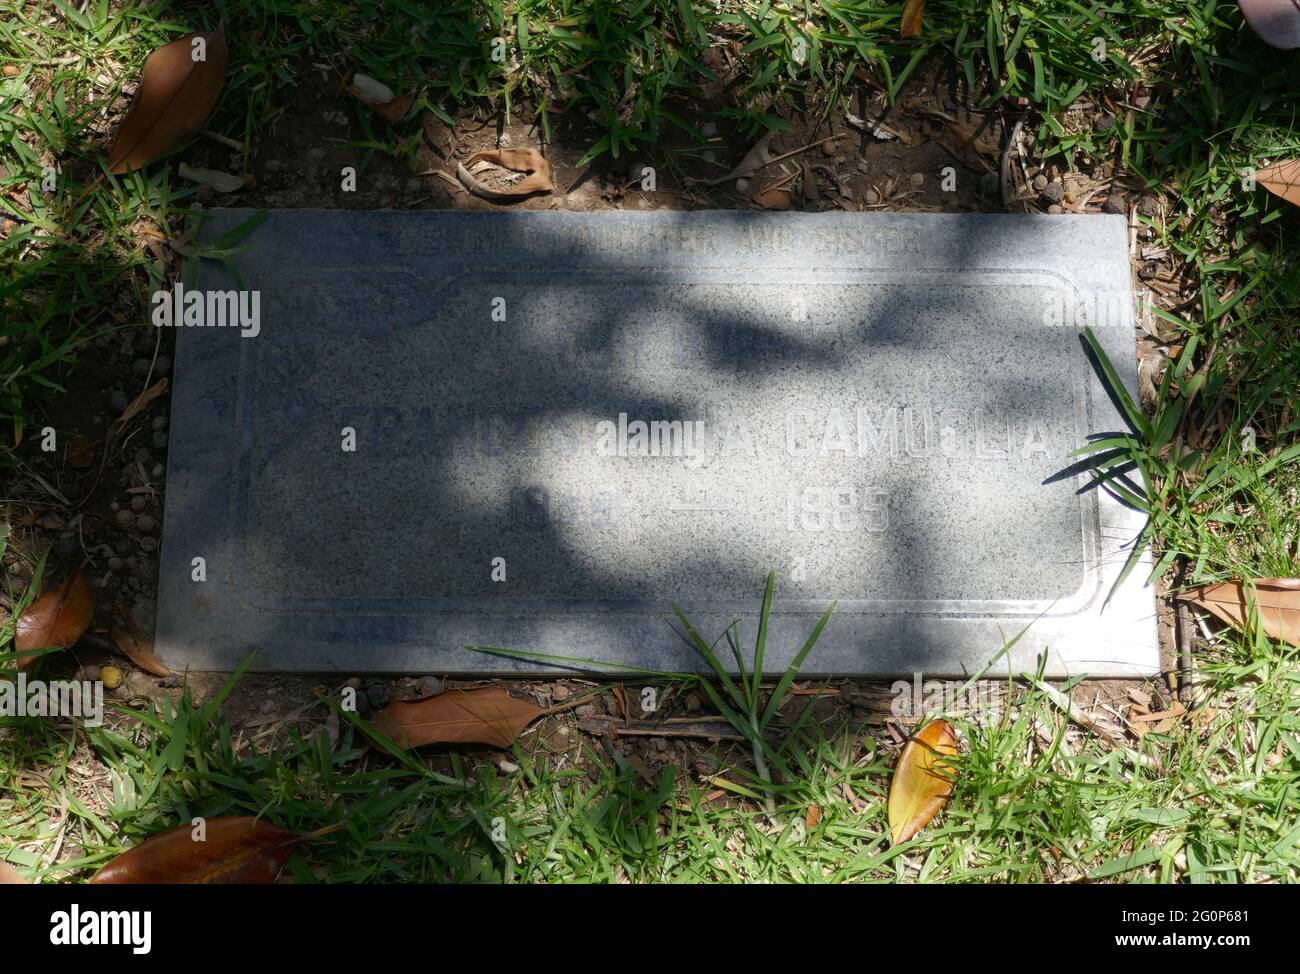 Santa Ana, California, USA 1st June 2021 A general view of atmosphere of Playmate/model Frances Anna Camuglia, aka Fran Gerard's Grave at Fairhaven Memorial Park on June 1, 2021 in Santa Ana, California, USA. Photo by Barry King/Alamy Stock Photo Stock Photo